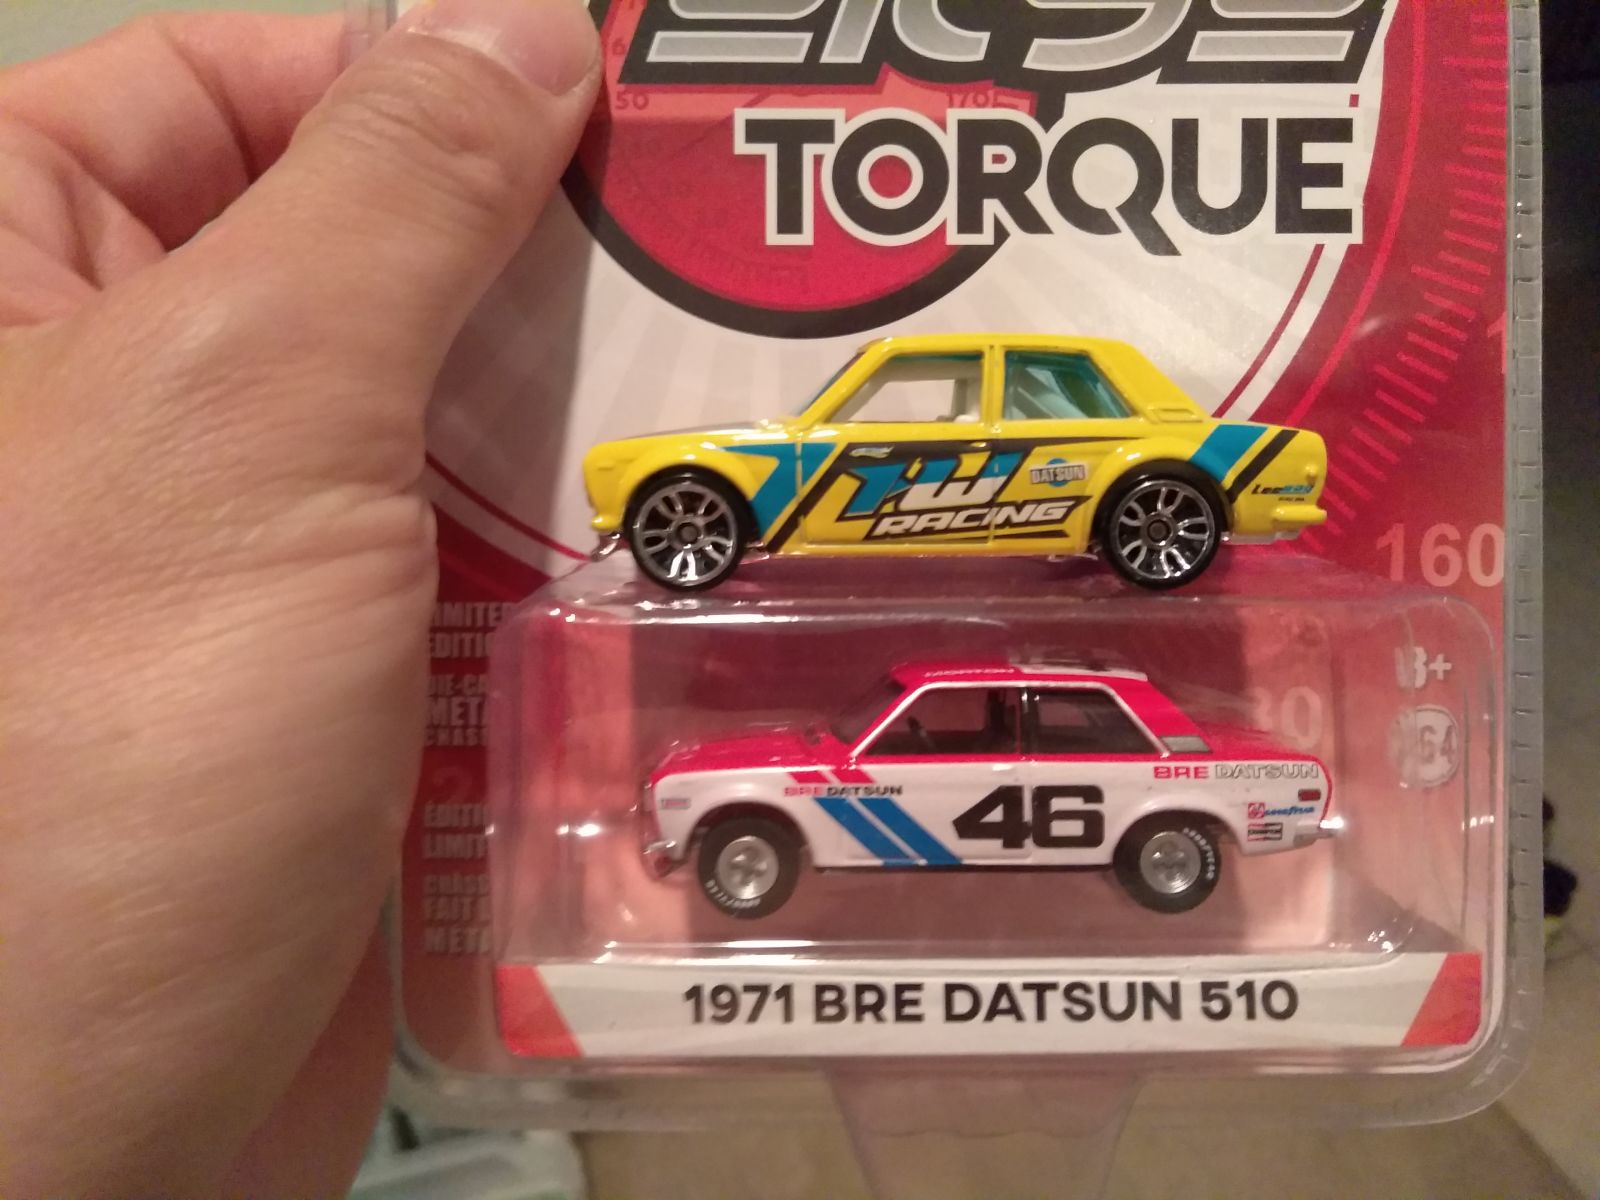 In person the Tokyo Torque Datsun is very small compared to the HW. Don’t let this photo fool you.